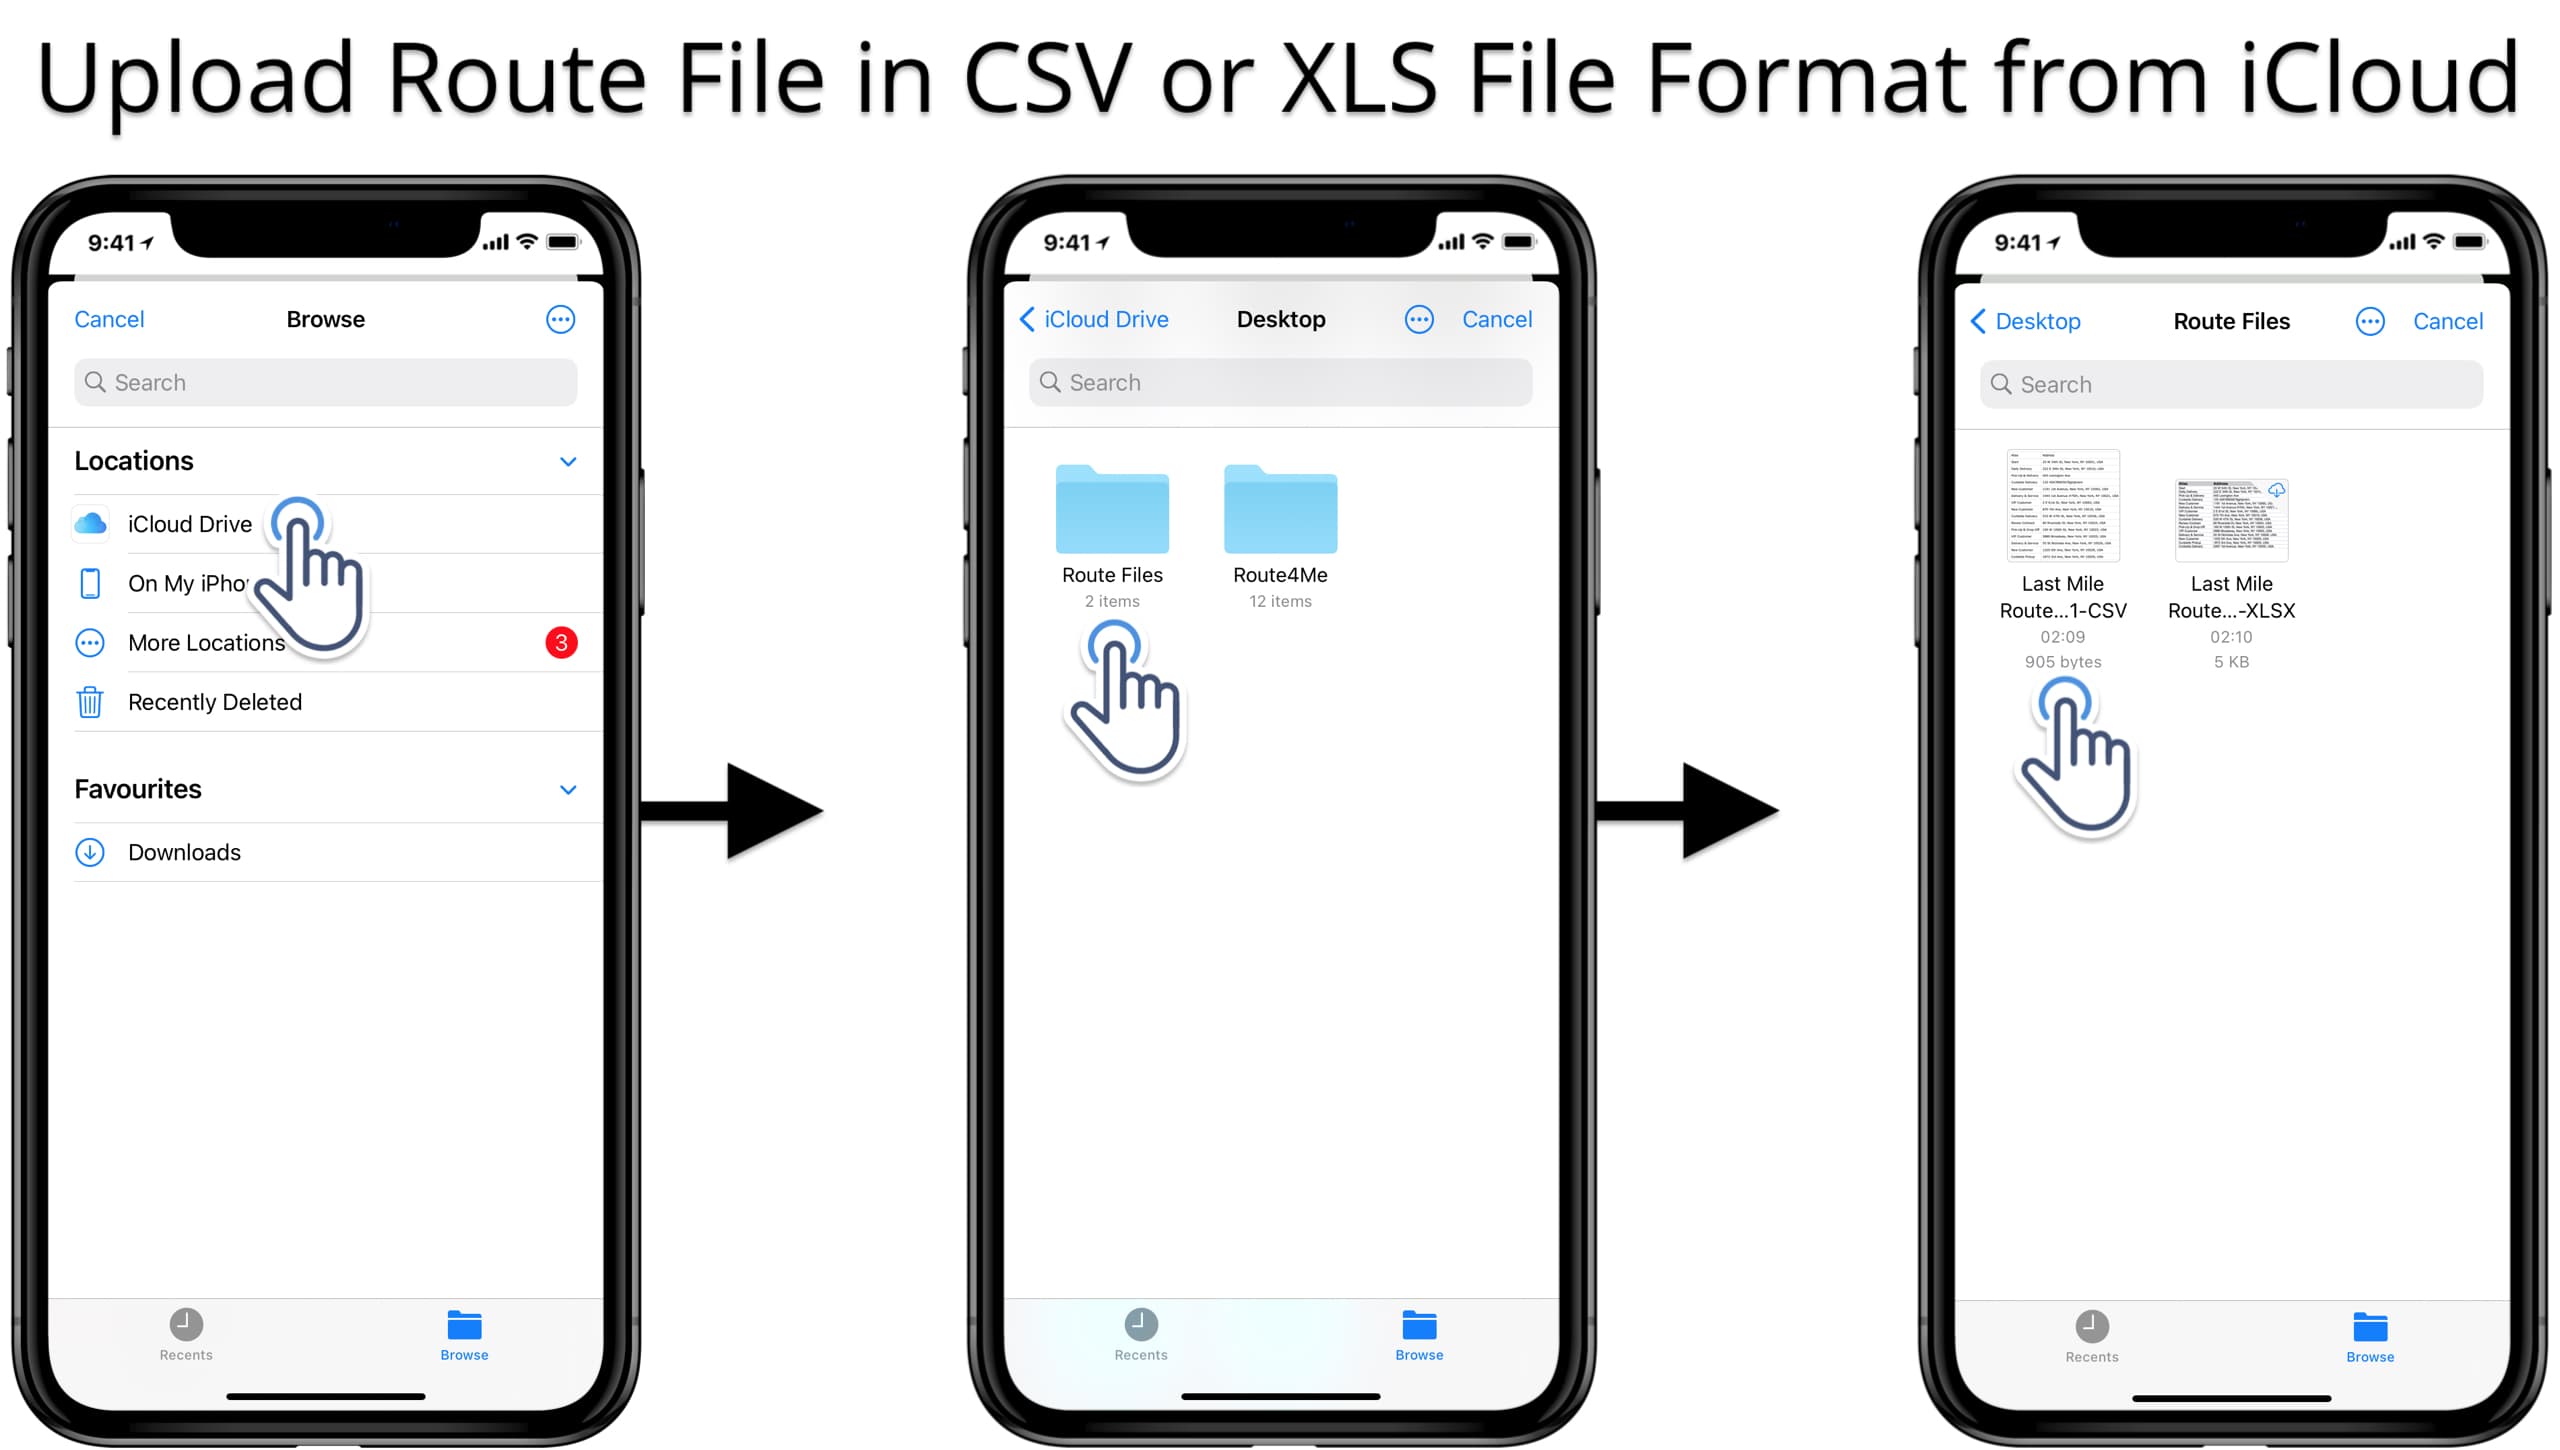 Upload CSV or XLS files with route addresses from iCloud to your iPhone route planner app.